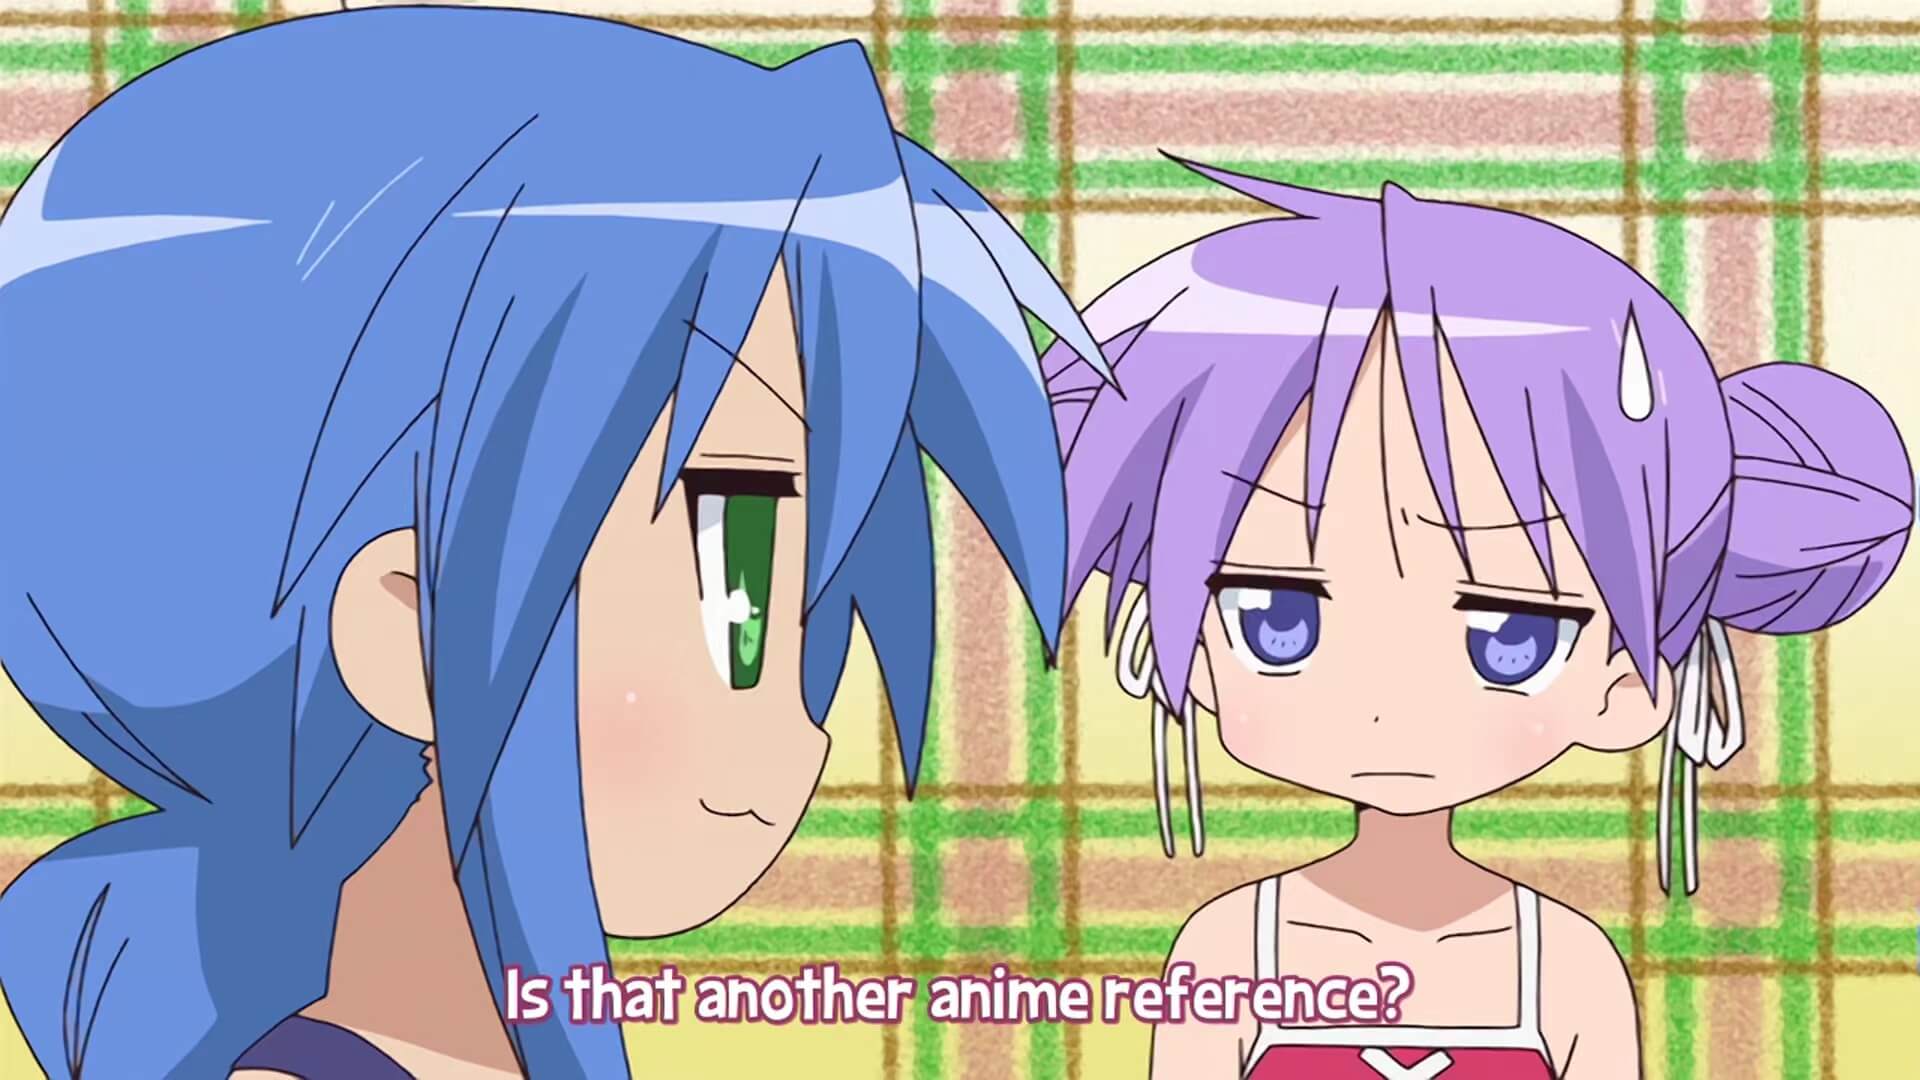 Kagami asks Konata if she's sharing another anime reference.